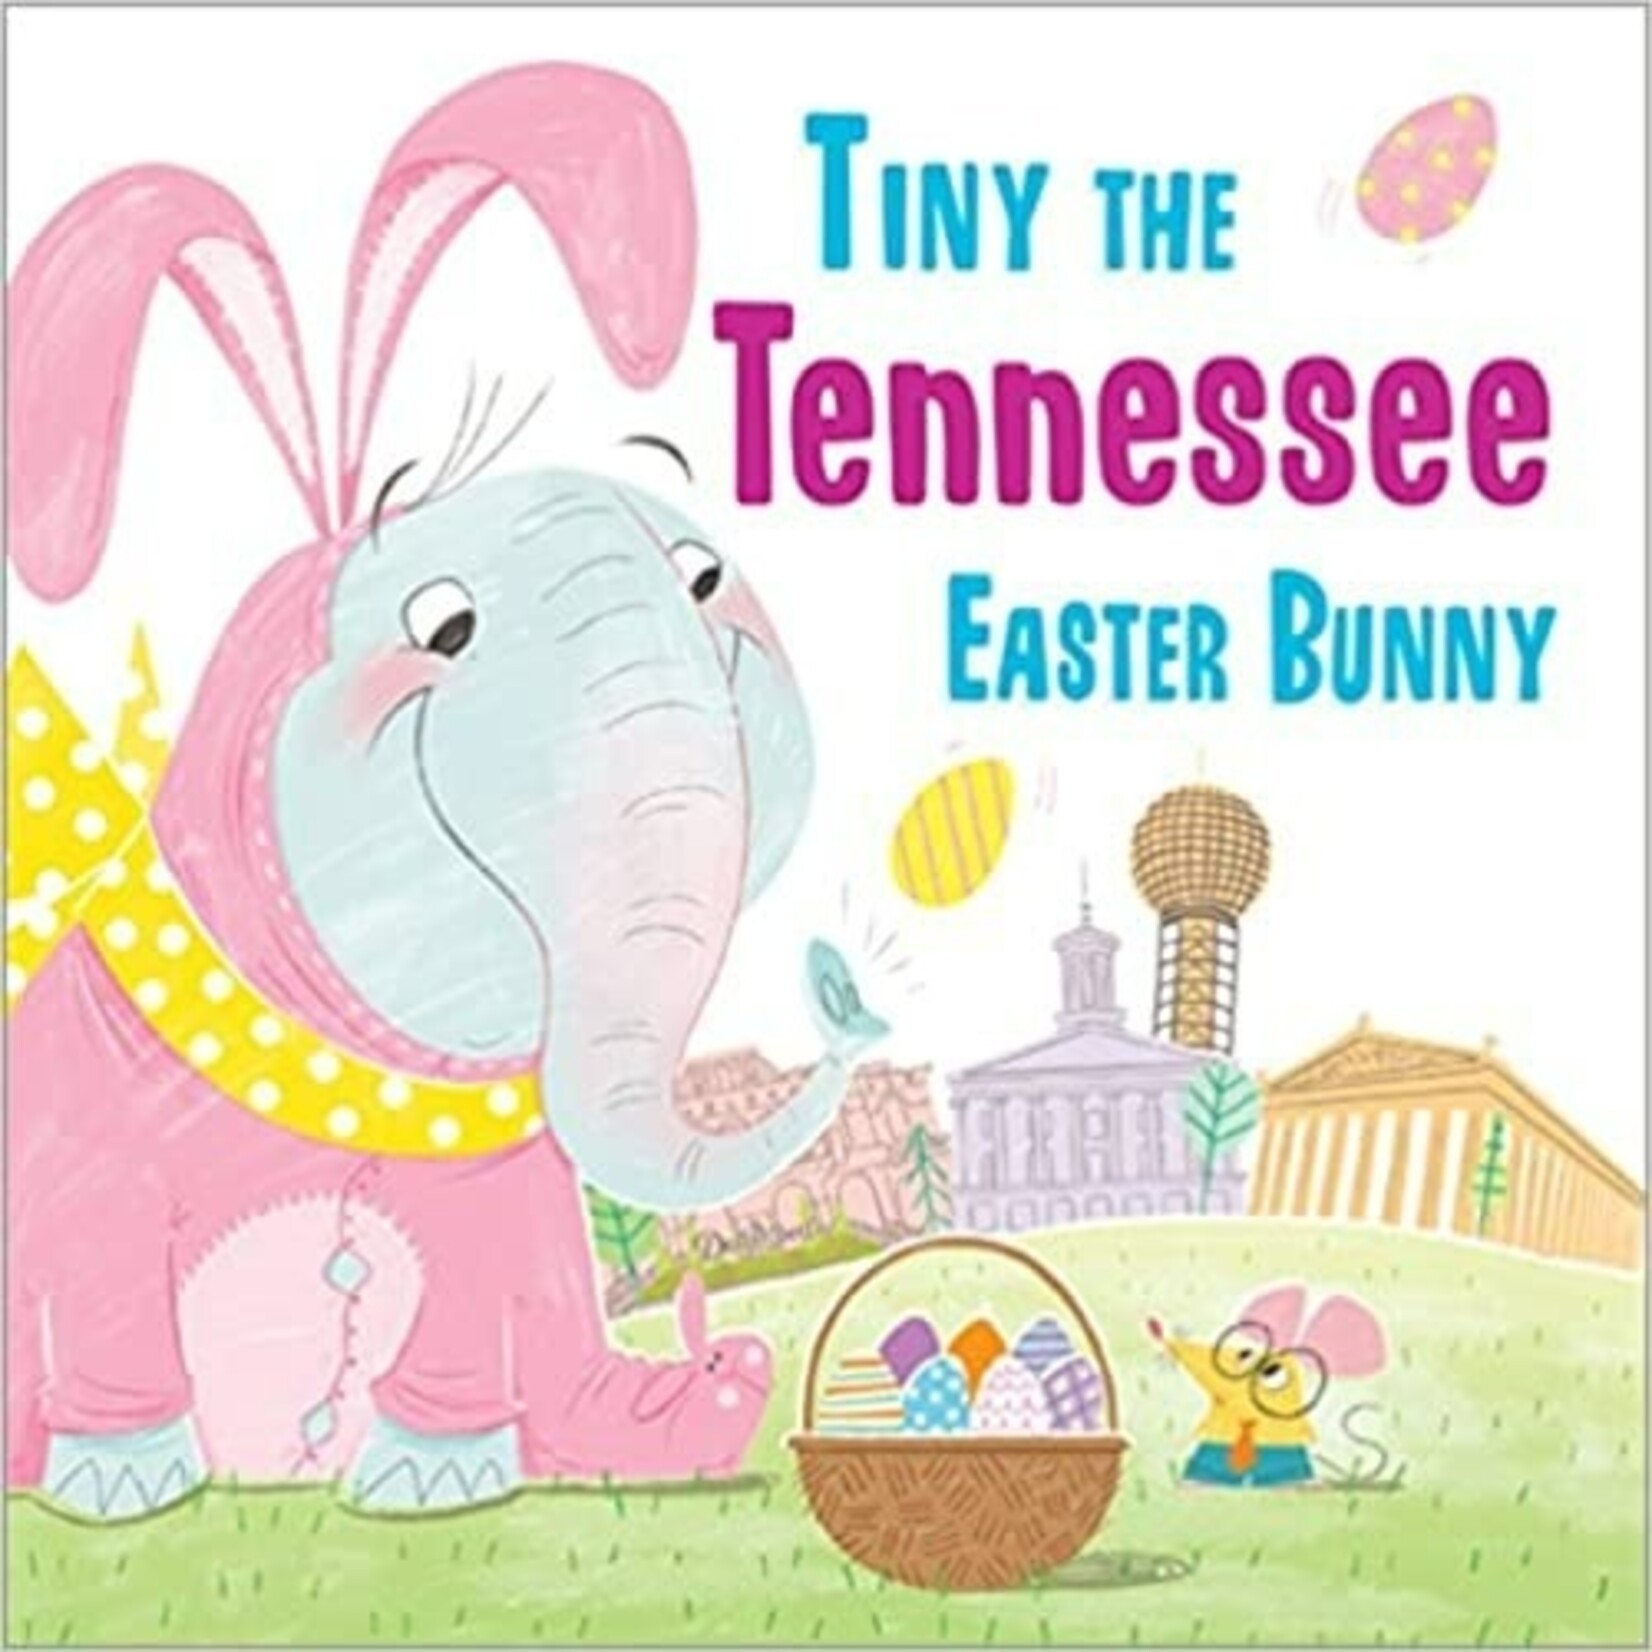 Tiny the Tennessee Bunny